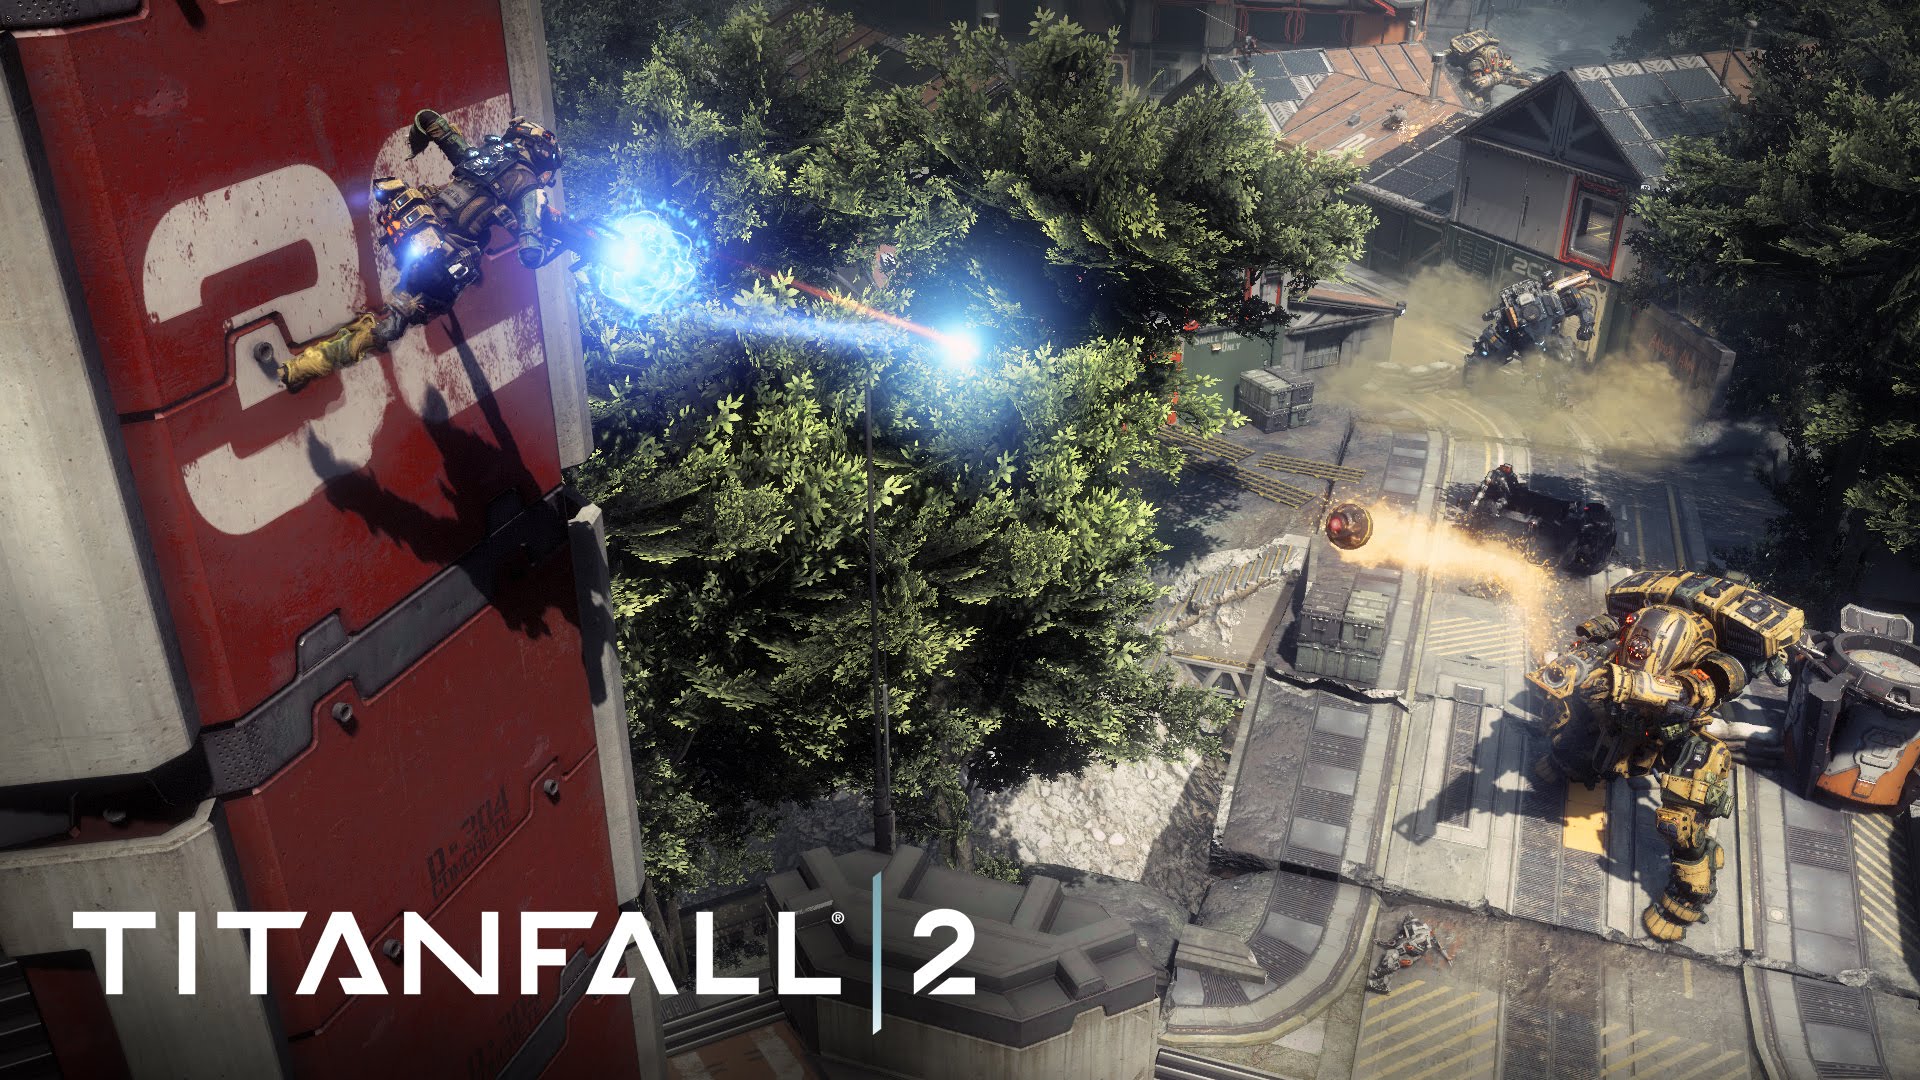 Titanfall 2 Live from Gamescom 2016